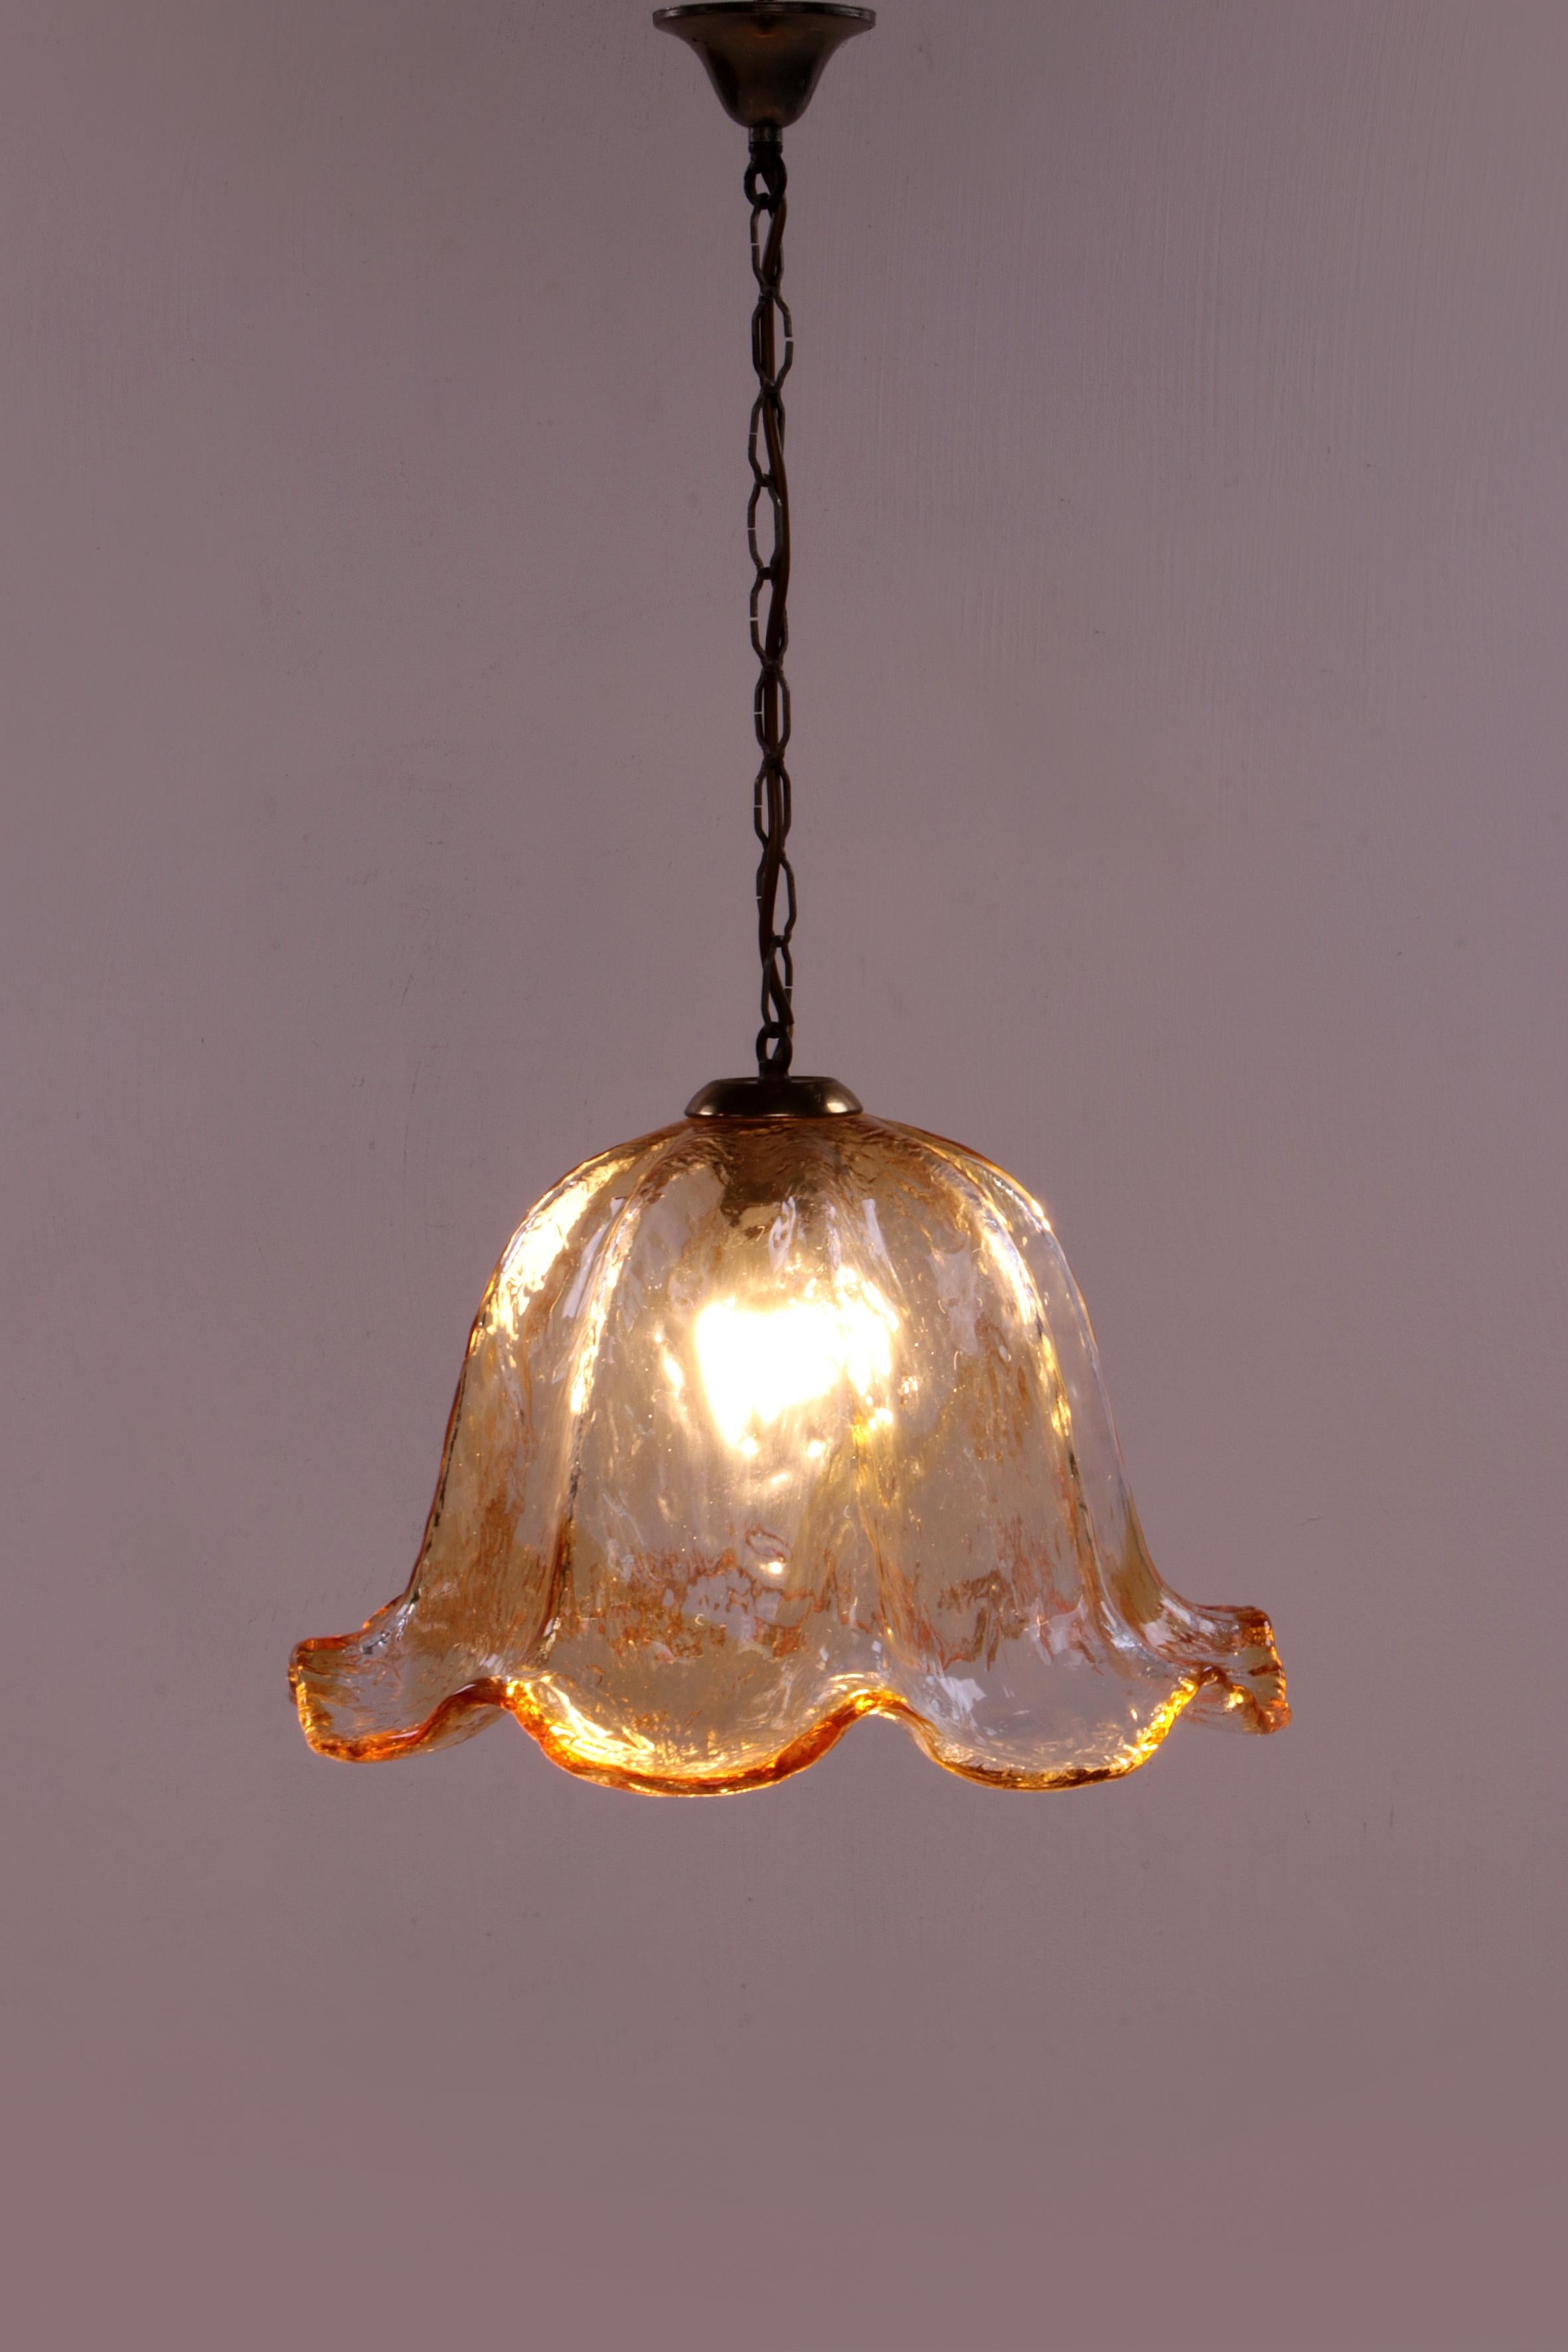 Very special Murano glass hanging lamp, 1960

The blown Murano glass has a beautiful orange and gold color on the edges.
As a result, this hanging lamp gives nice warm light. Considering its age, this hanging lamp is still in original and very good